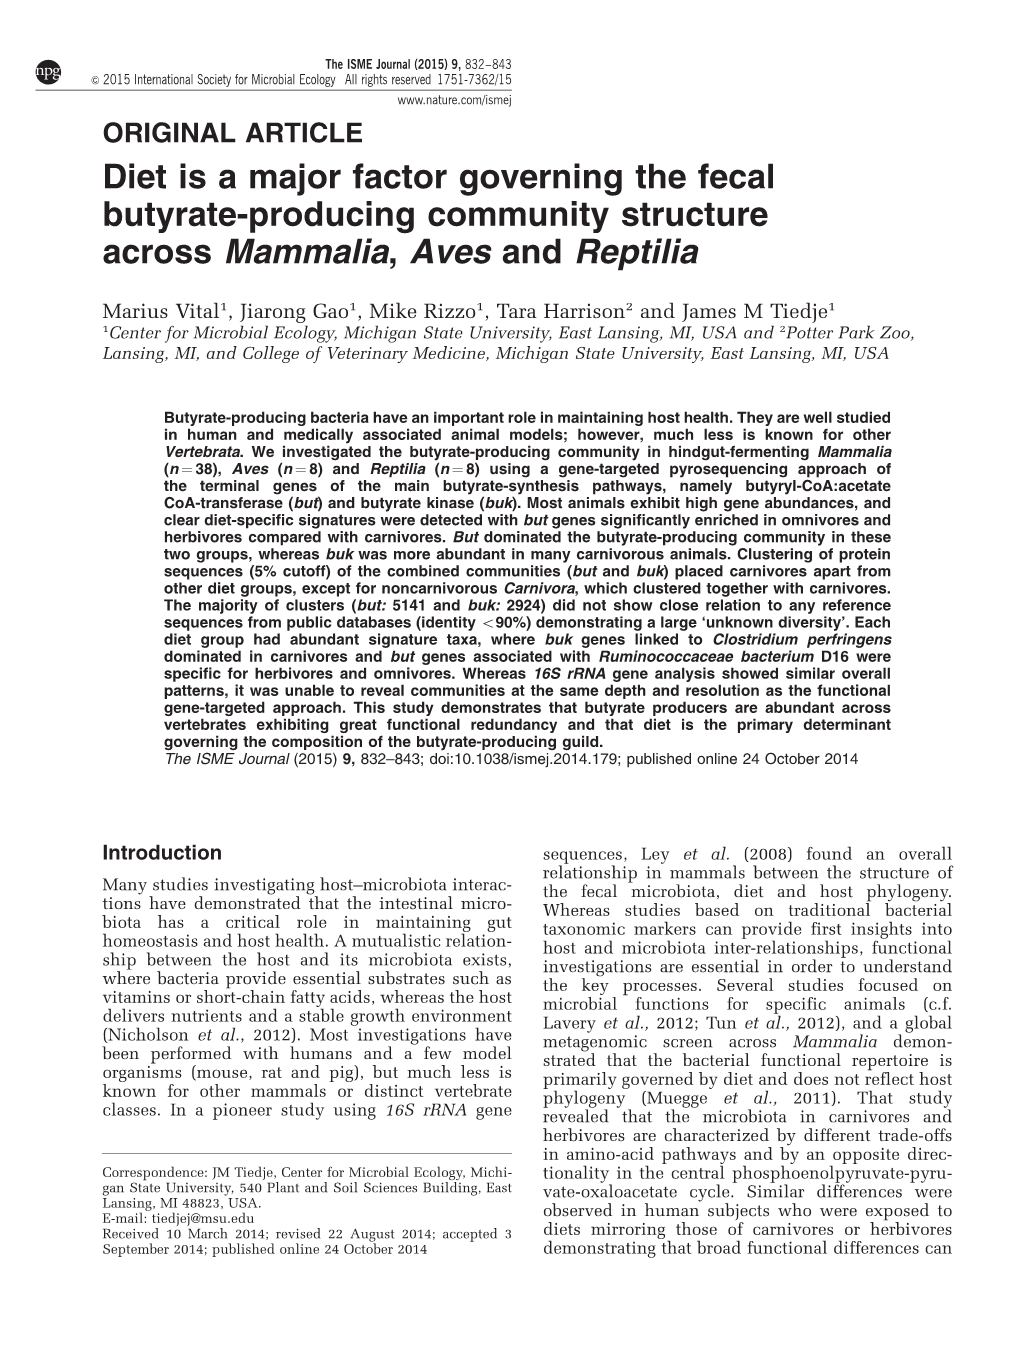 Diet Is a Major Factor Governing the Fecal Butyrate-Producing Community Structure Across Mammalia, Aves and Reptilia